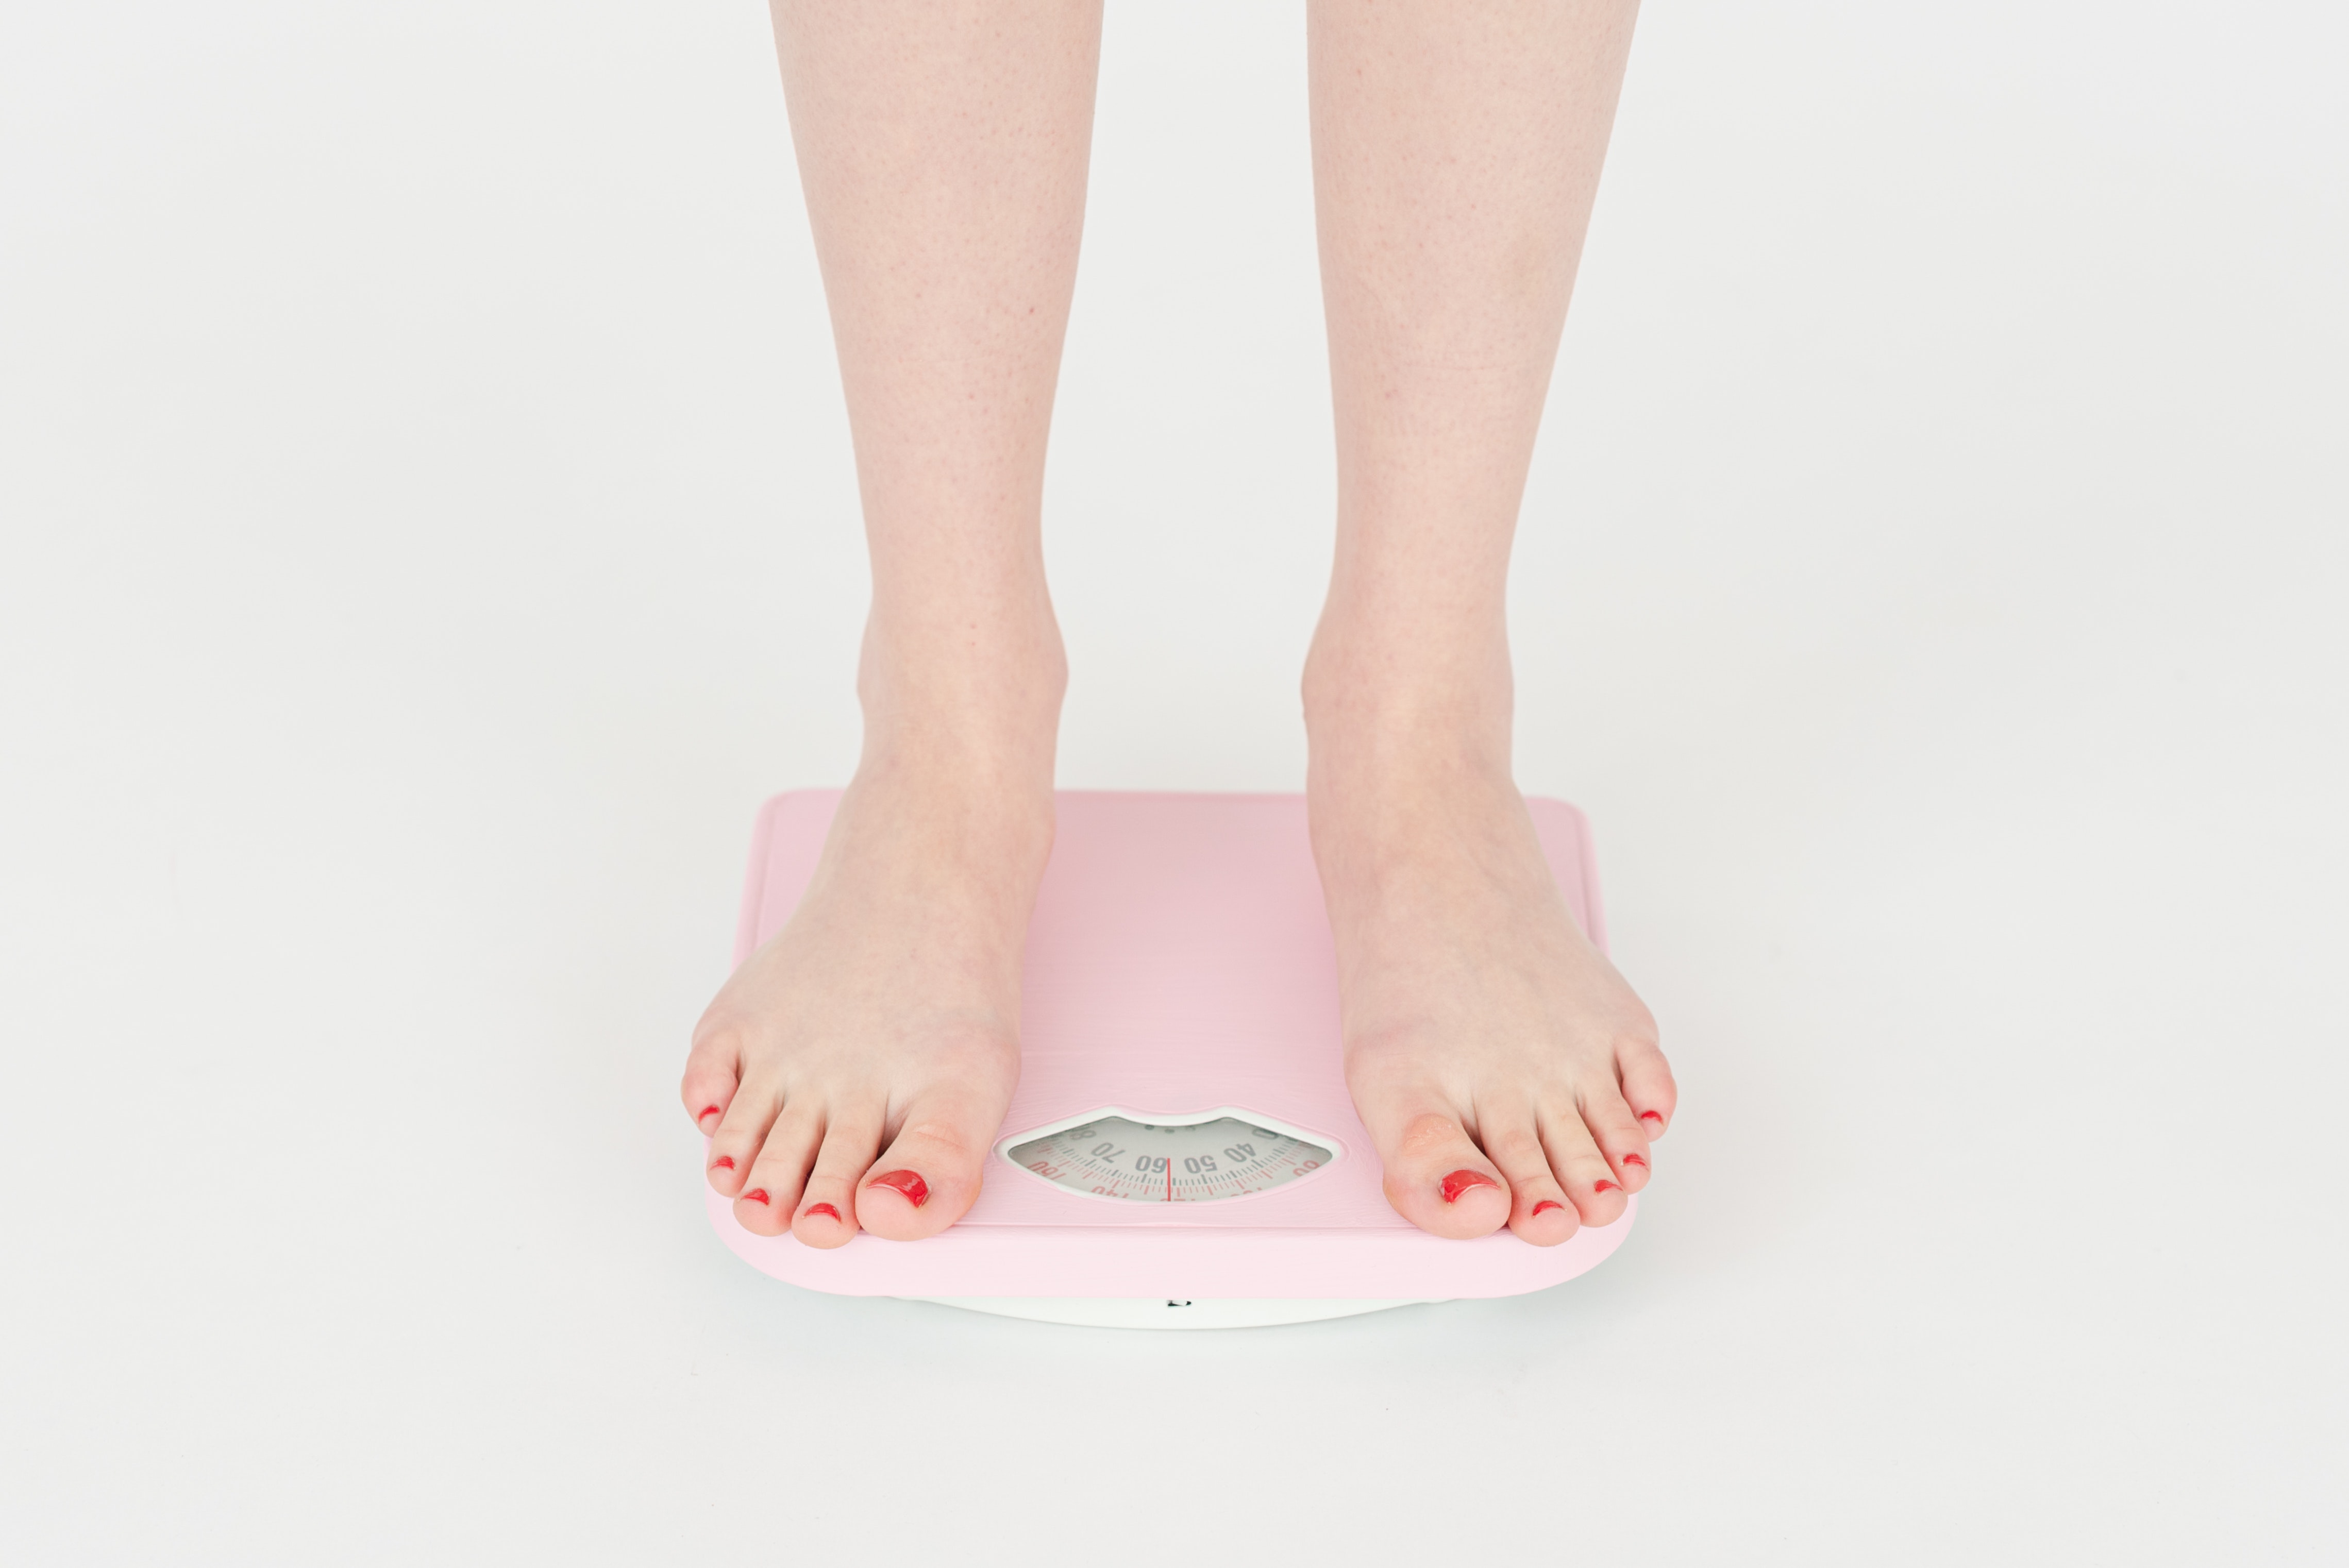 XLS weight loss - Scales